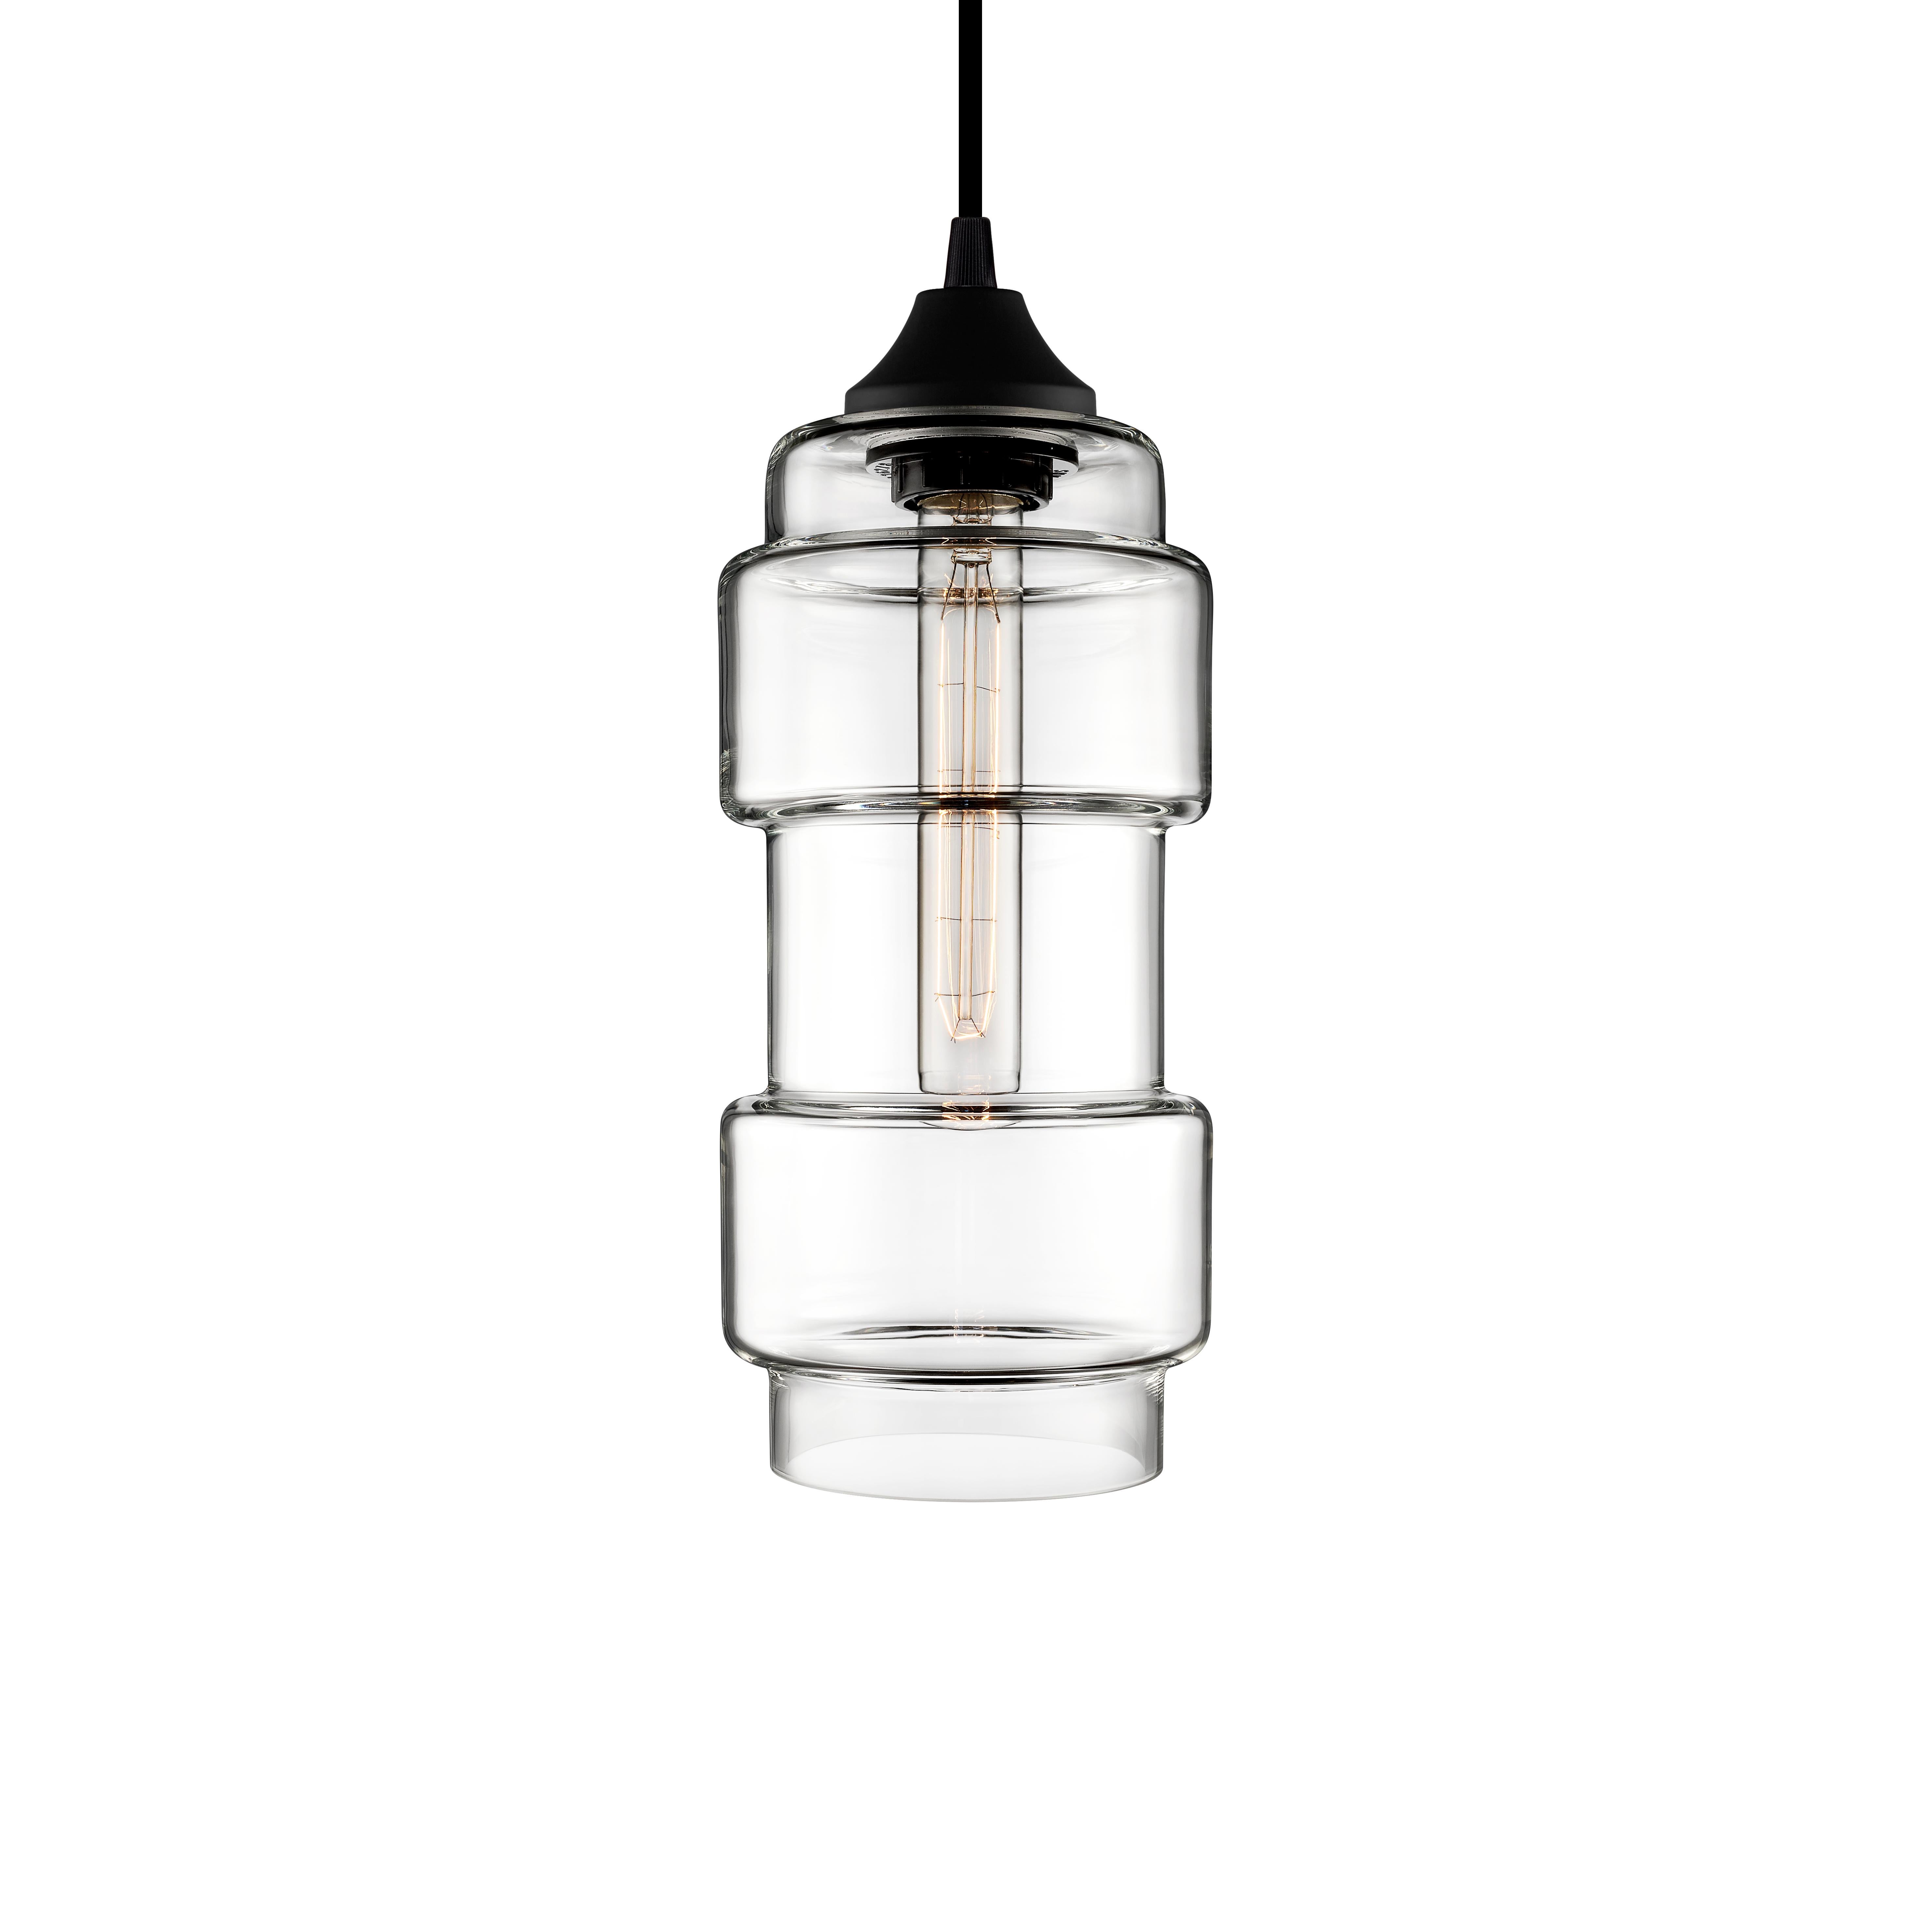 Inspired by ancient castle walls, the defined edges and slender build of the Muralla pendant enhance any setting. Every single glass pendant light that comes from Niche is handblown by real human beings in a state-of-the-art studio located in